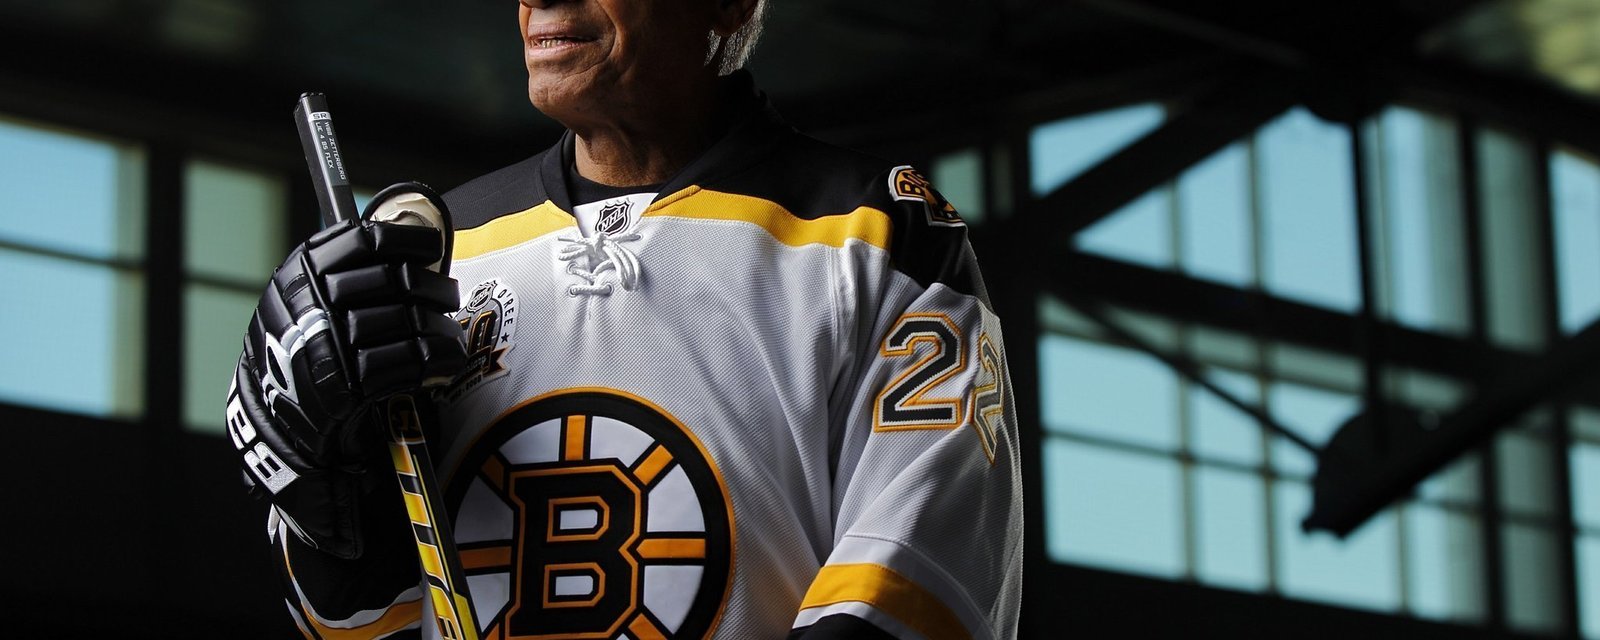 NHL's first black player frustrated with racism in the league